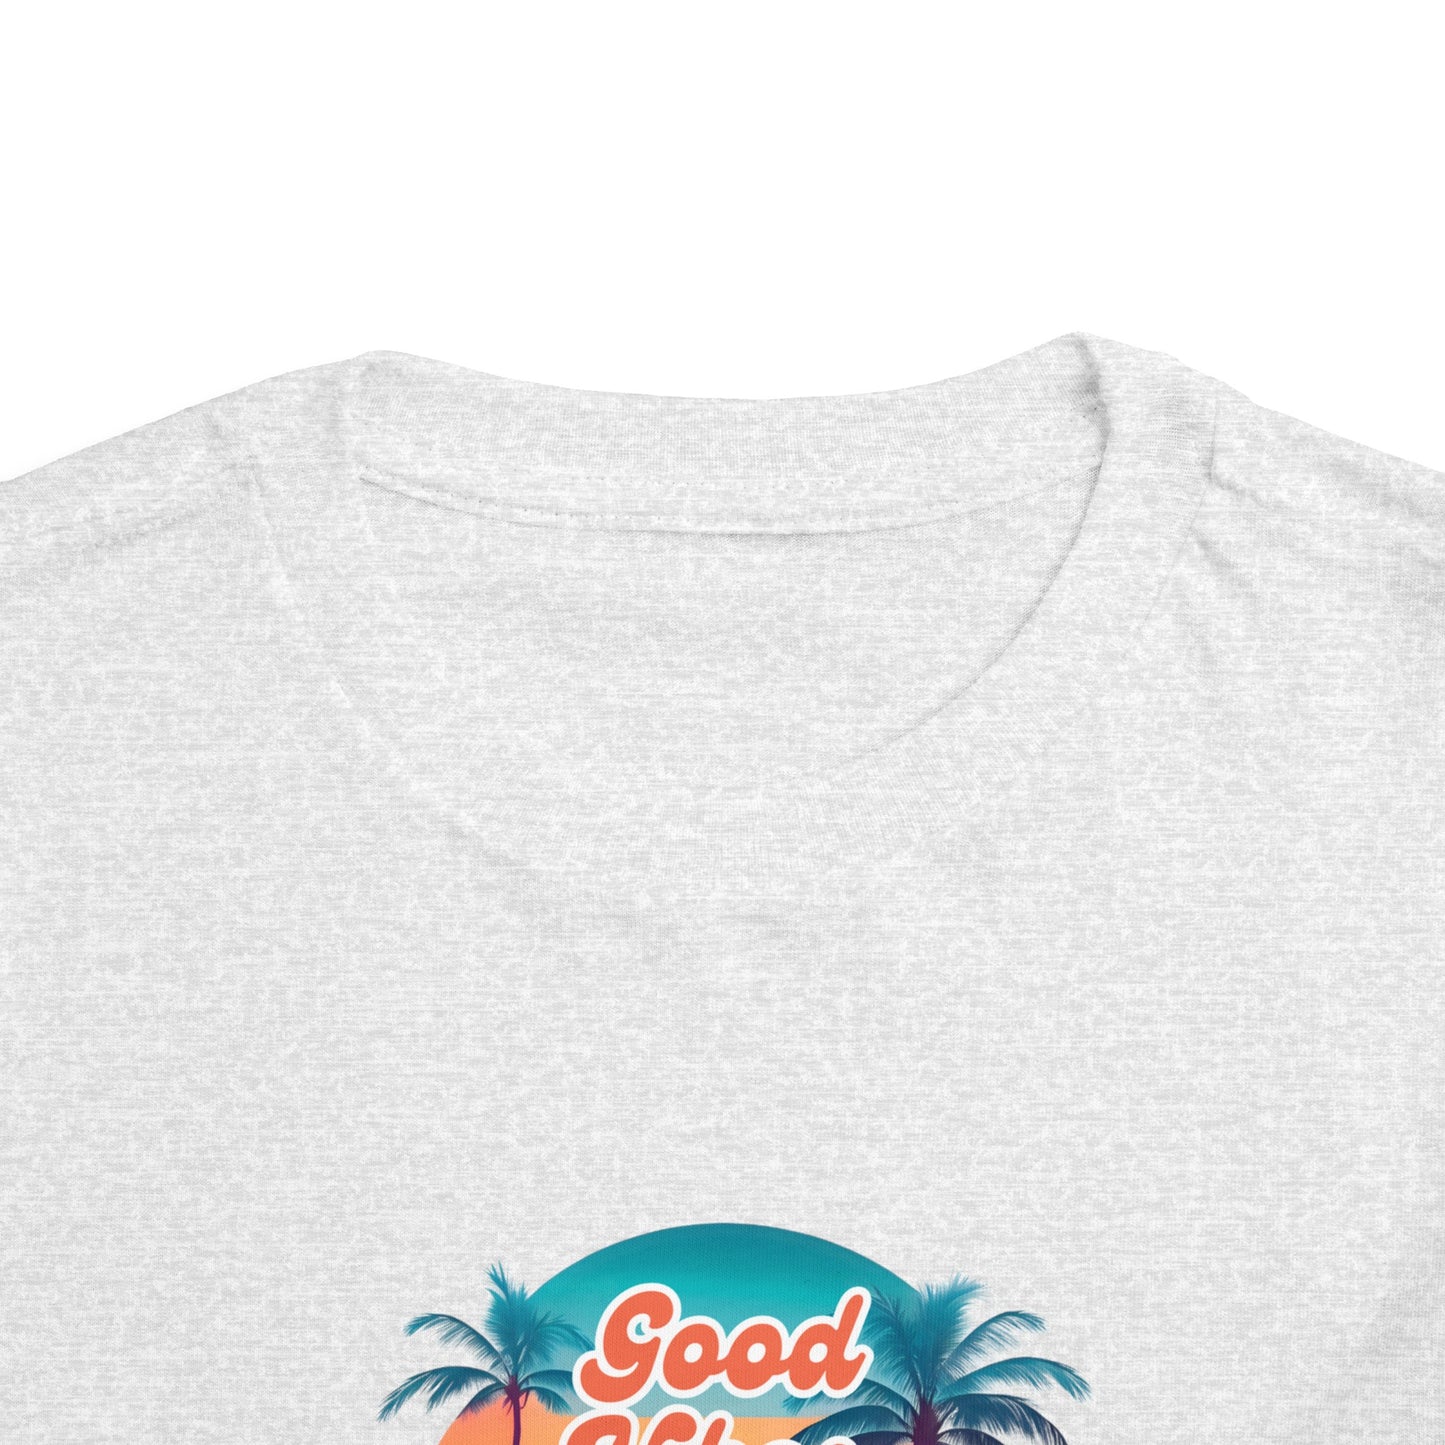 Good Vibes Toddler Heather Tee - Soft Airlume Cotton, Comfortable & Stylish